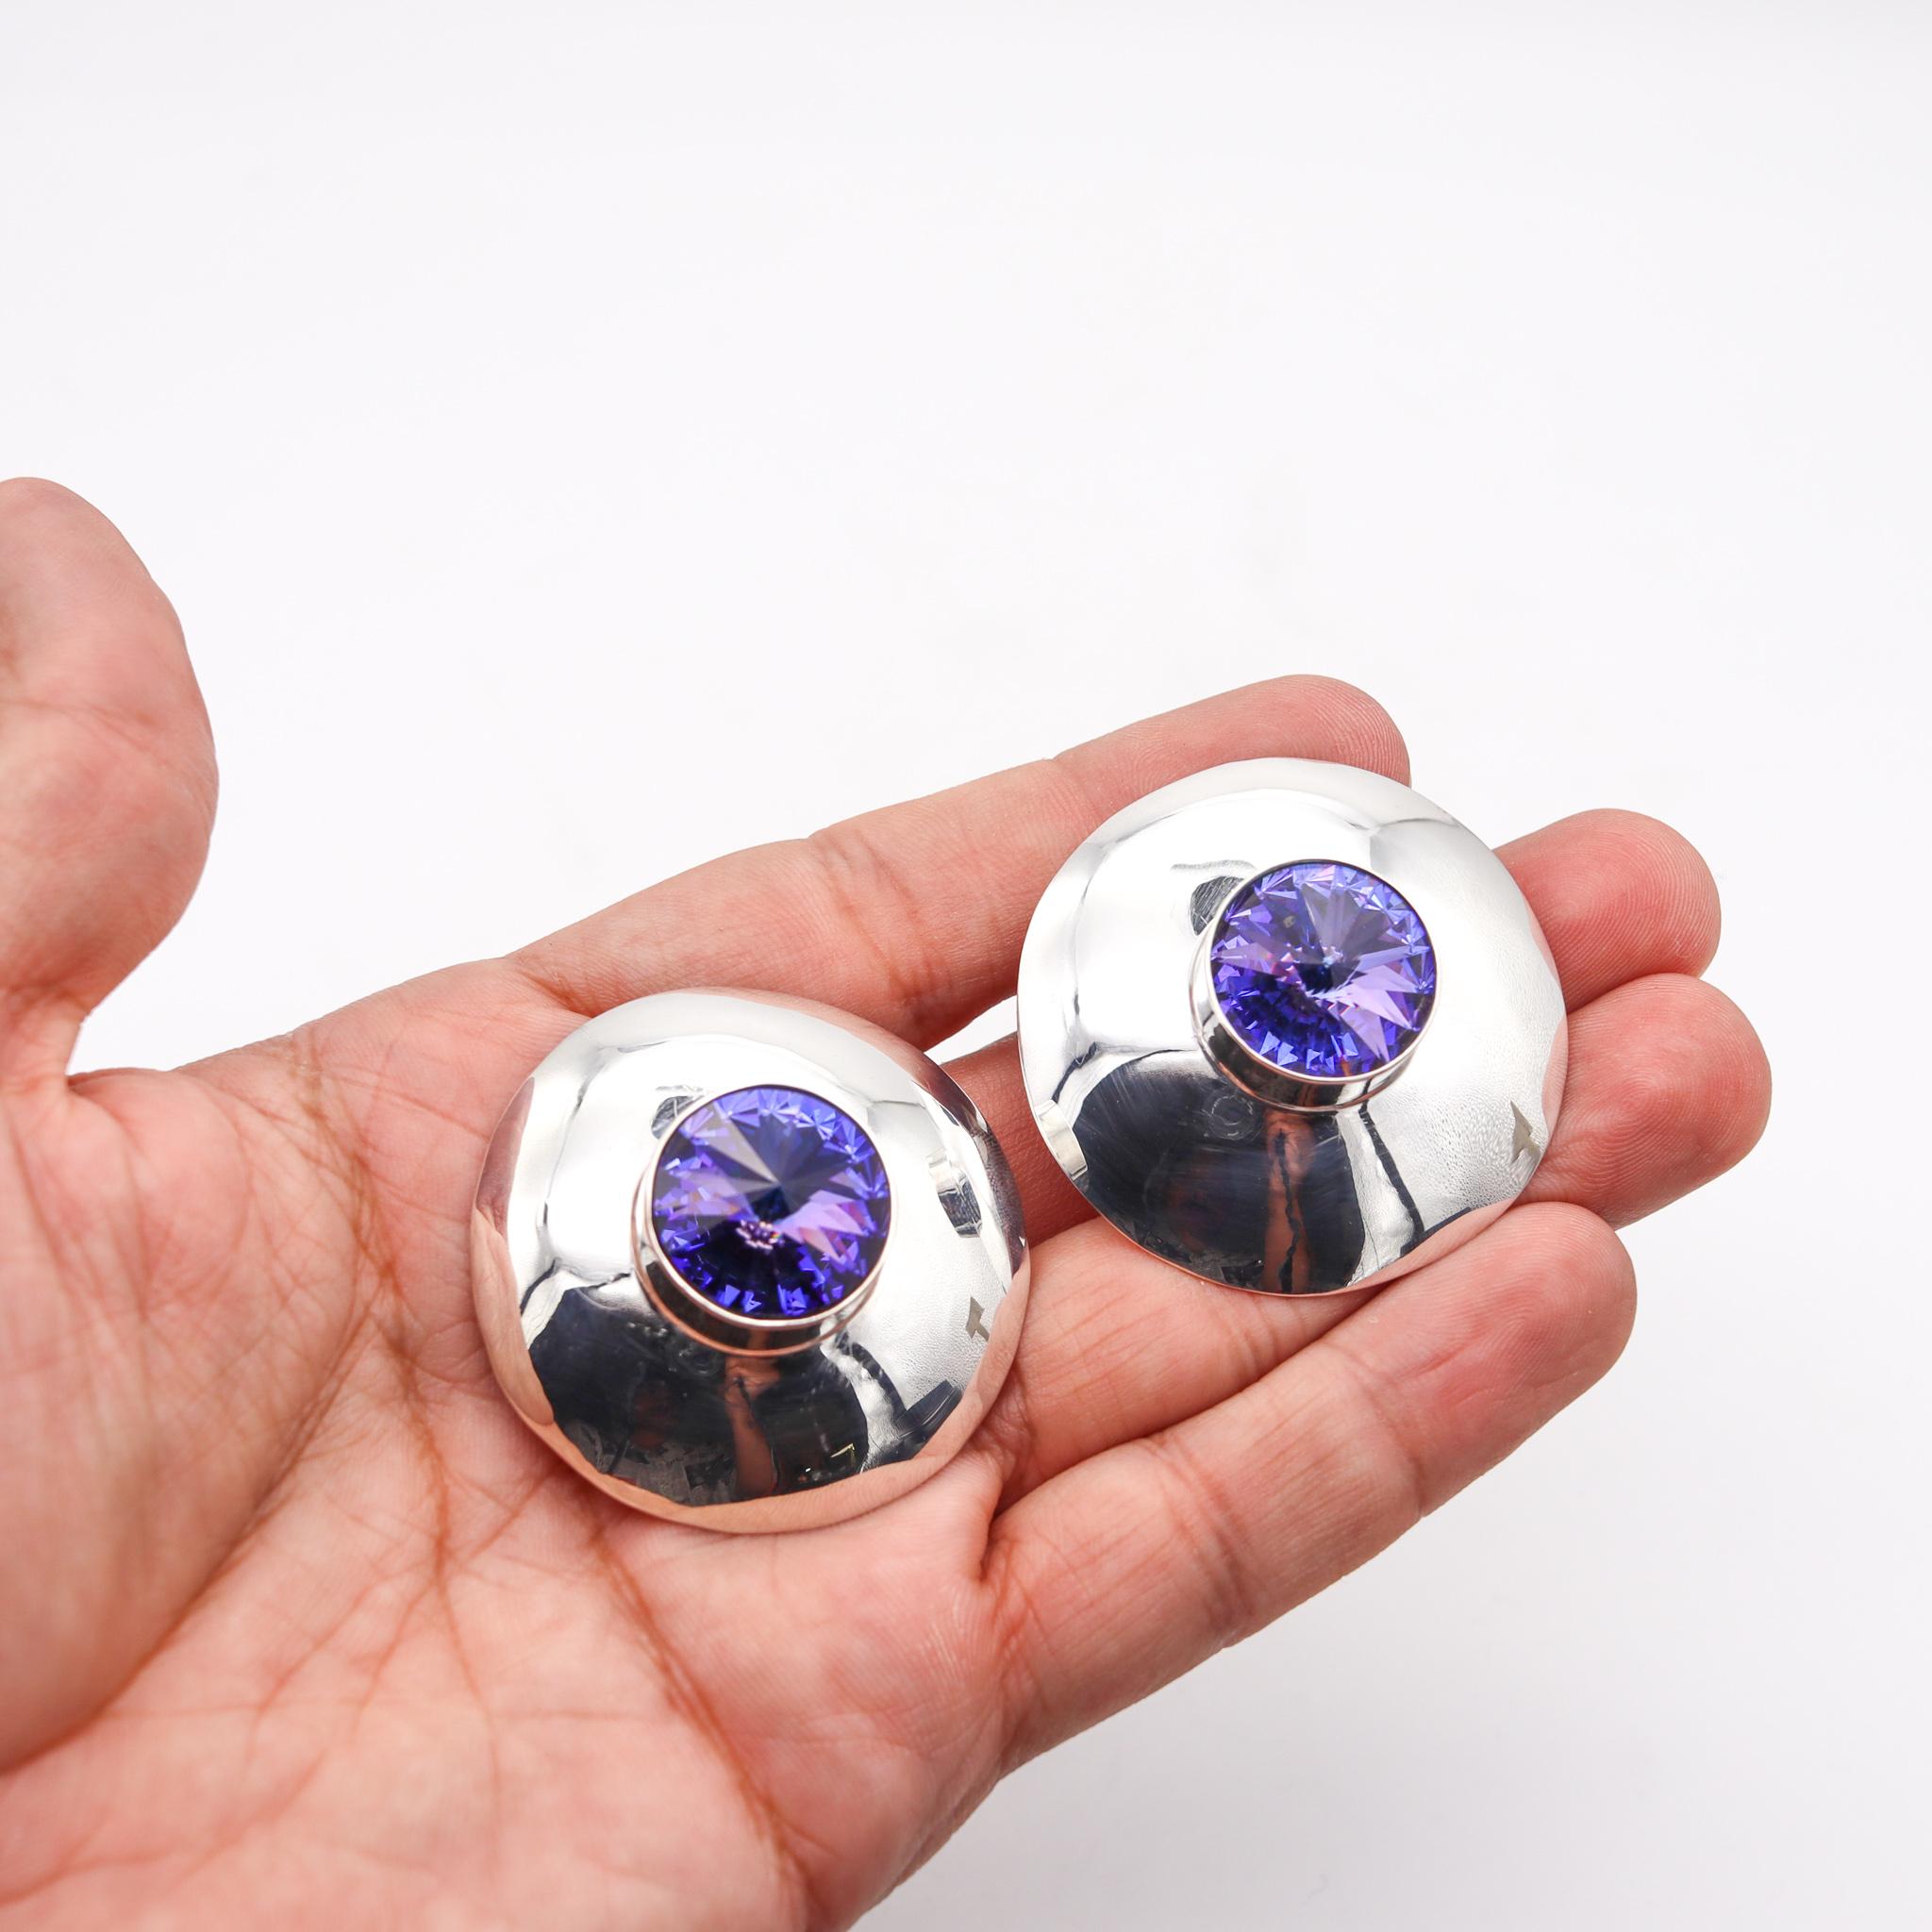 Women's Mexico 1970 Taxco Retro Modernist Earrings In Sterling Silver With Purple Glass For Sale